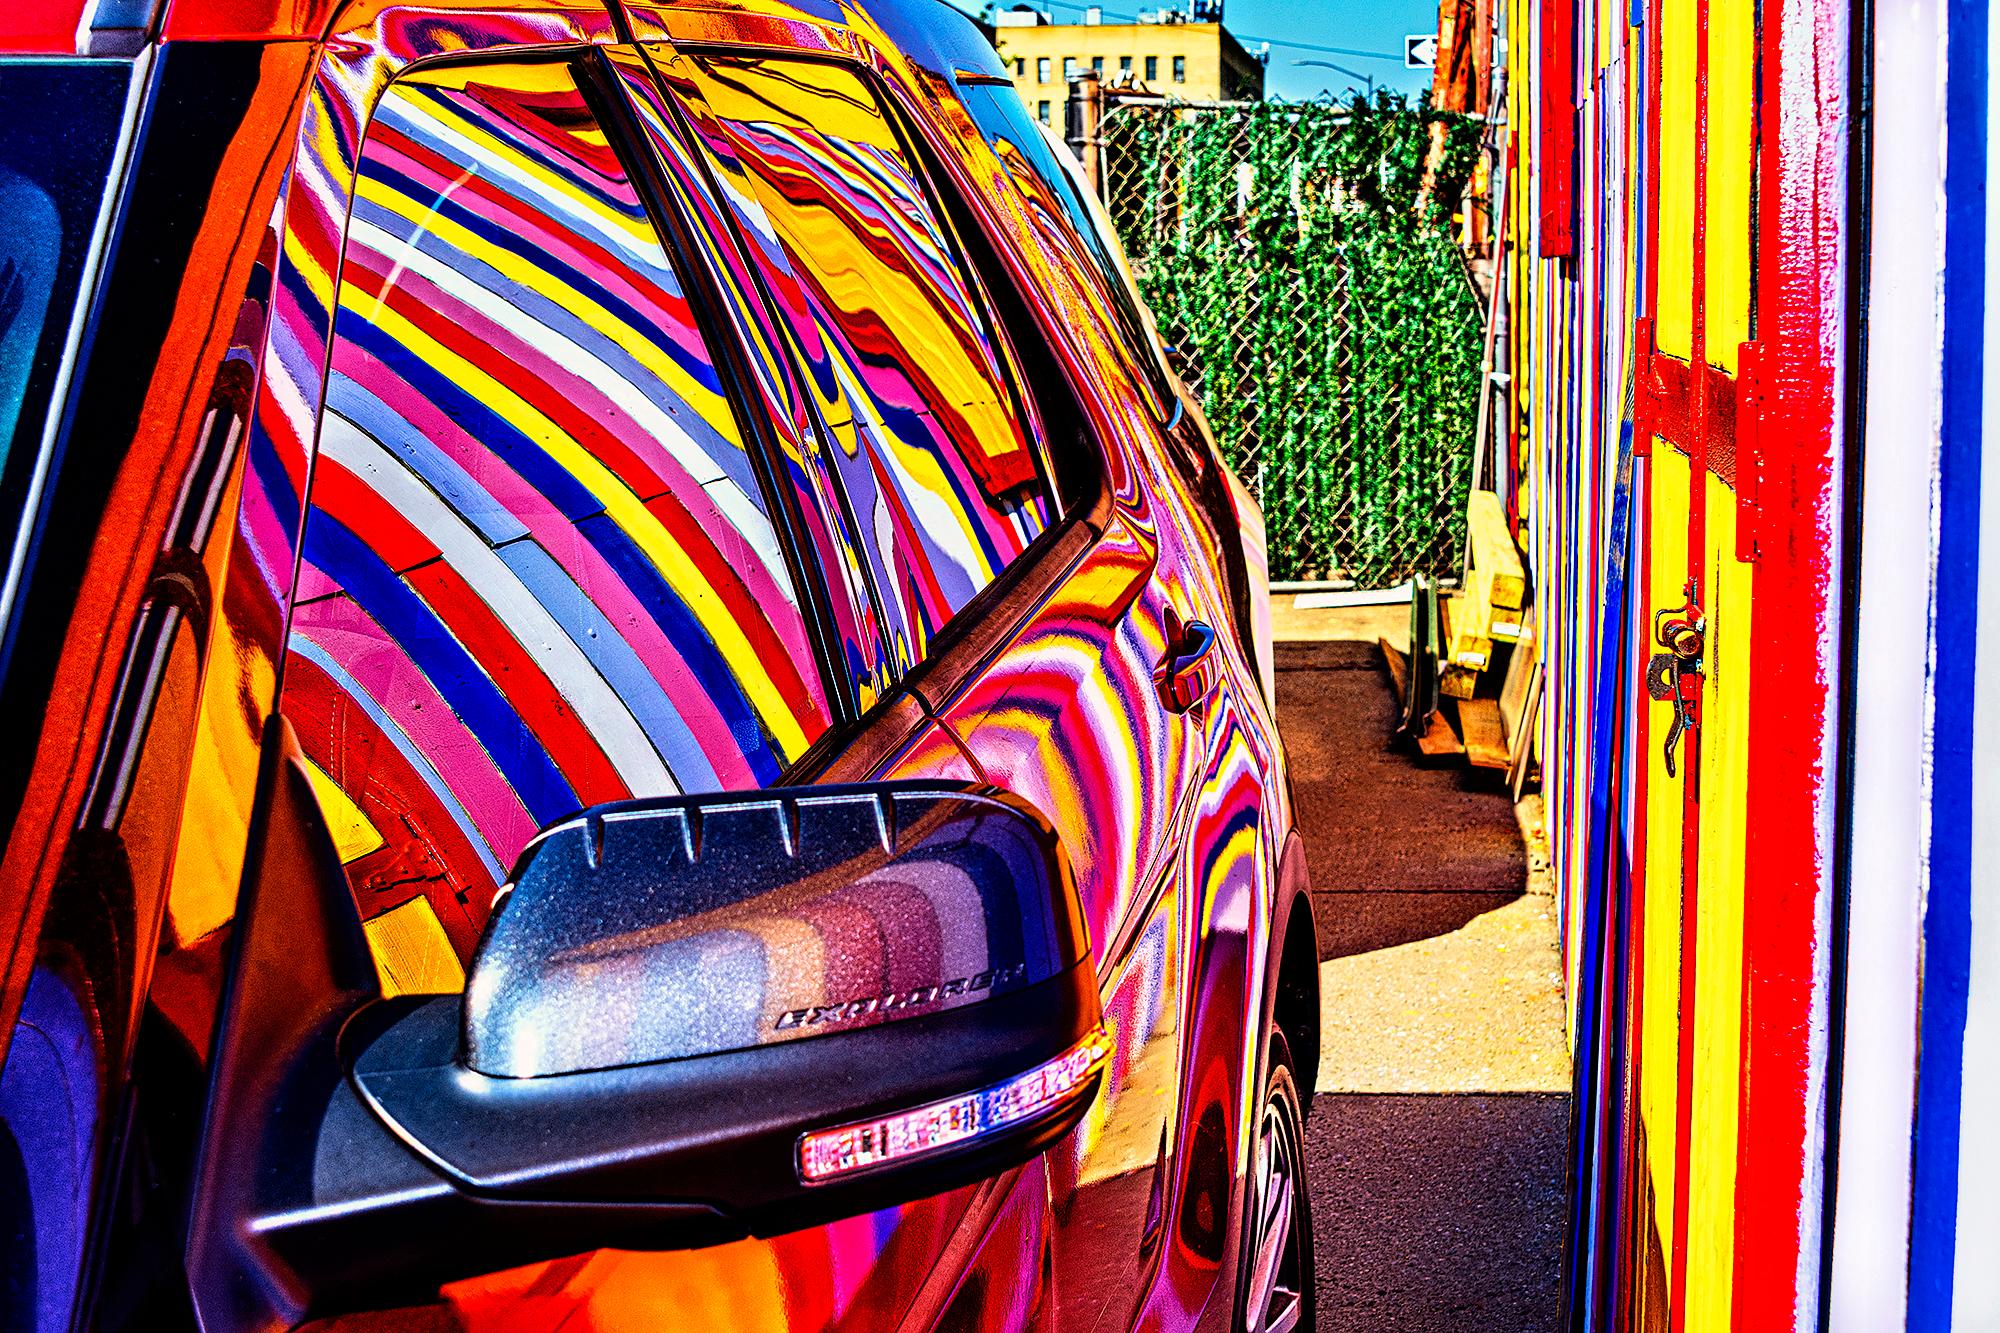 Colorful Street Art Reflected in Car